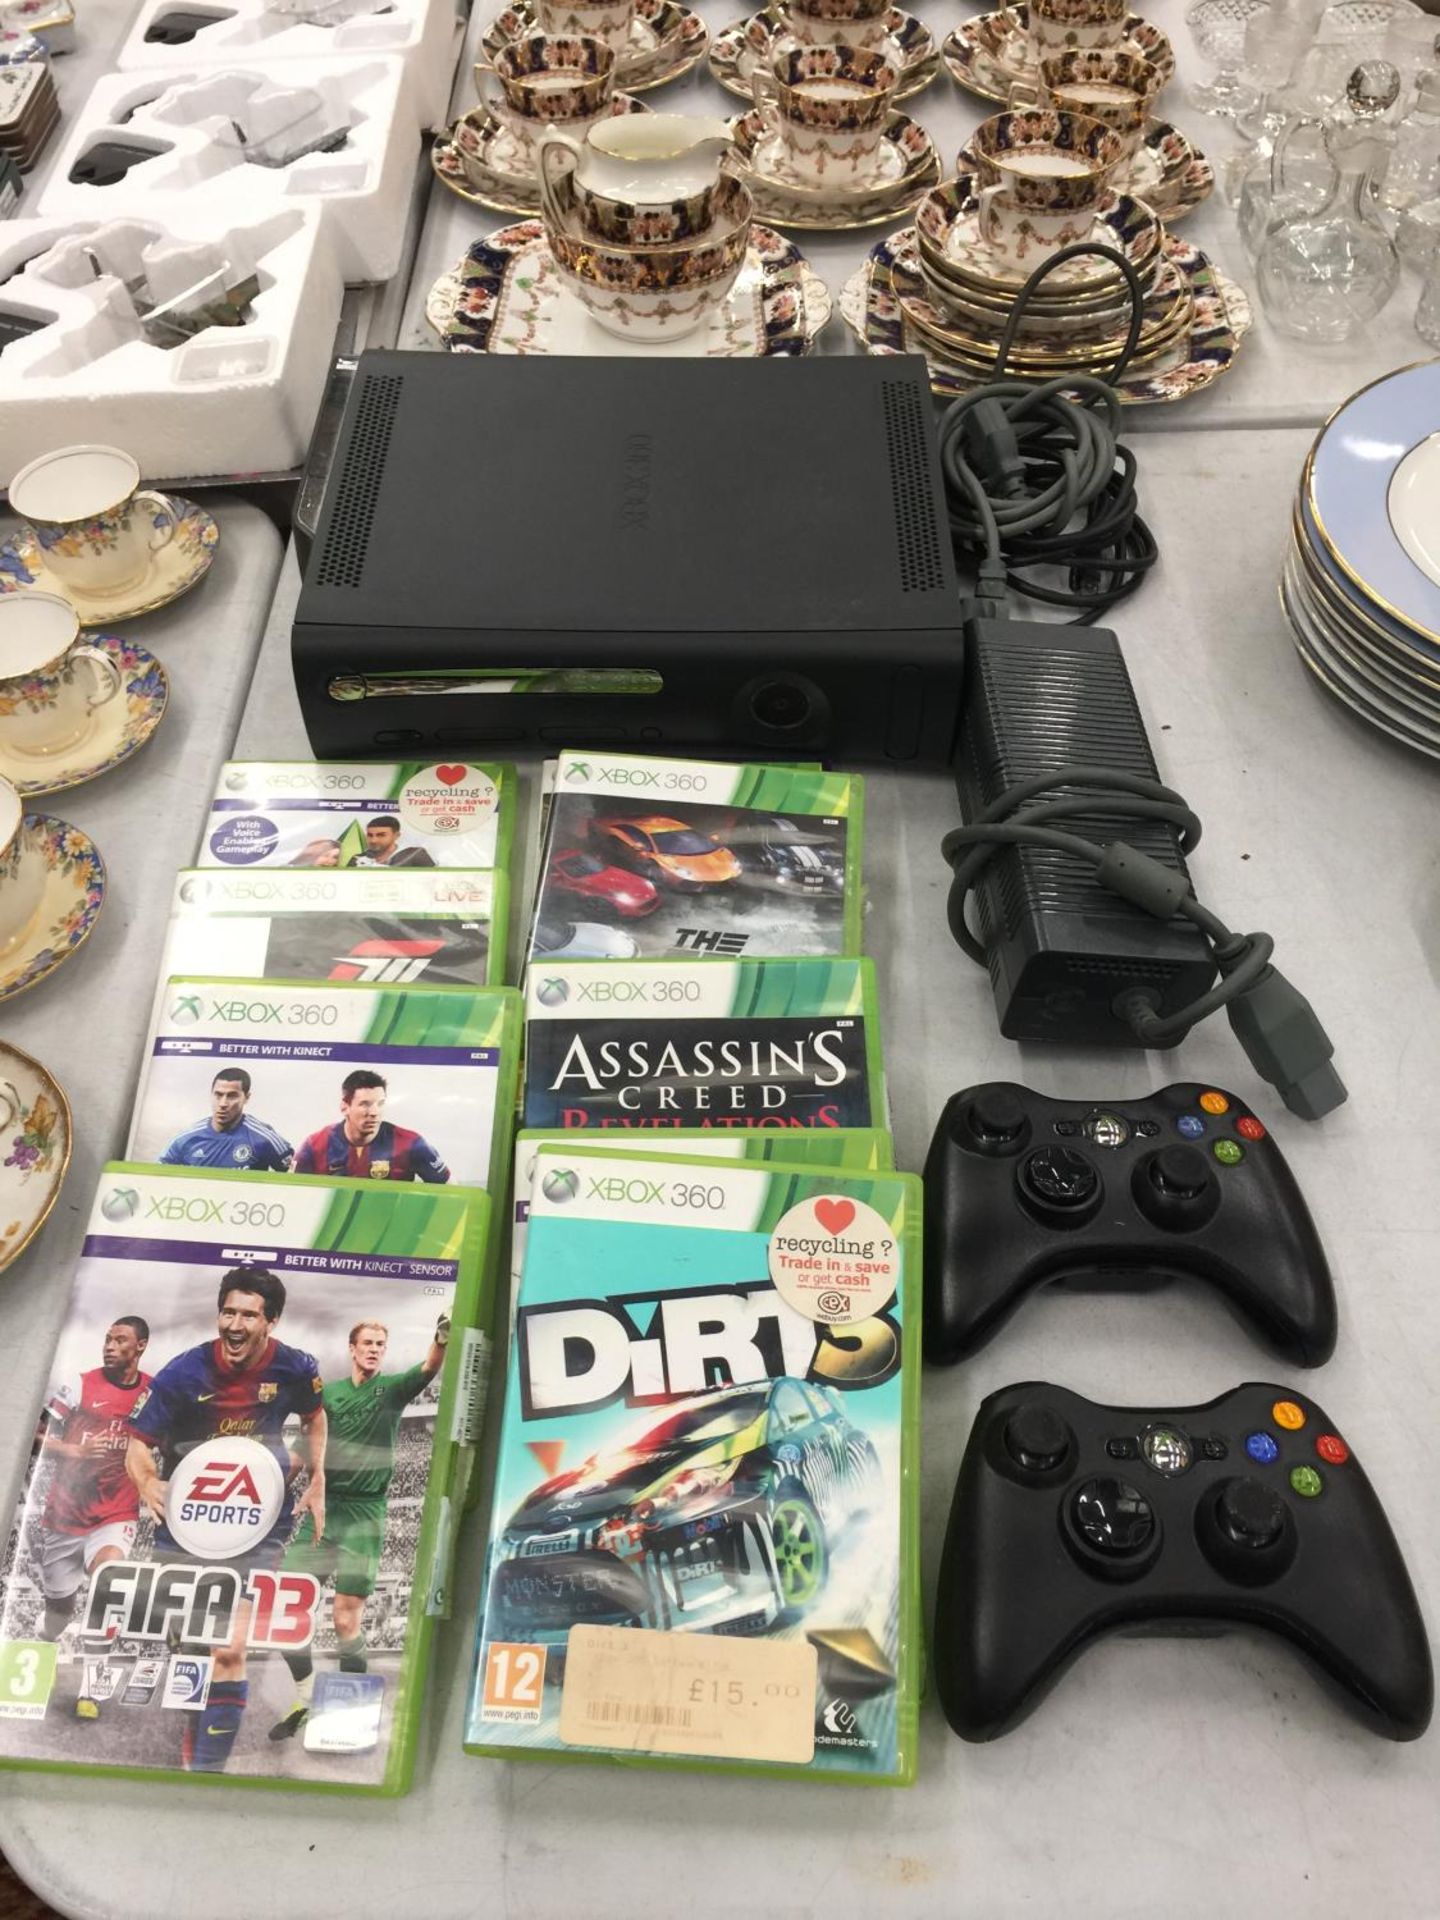 AN X-BOX 360 CONSOLE, POWER PACK, CONTROLLERS AND A QUANTITY OF GAMES TO INCLUDE FIFA '13, '14